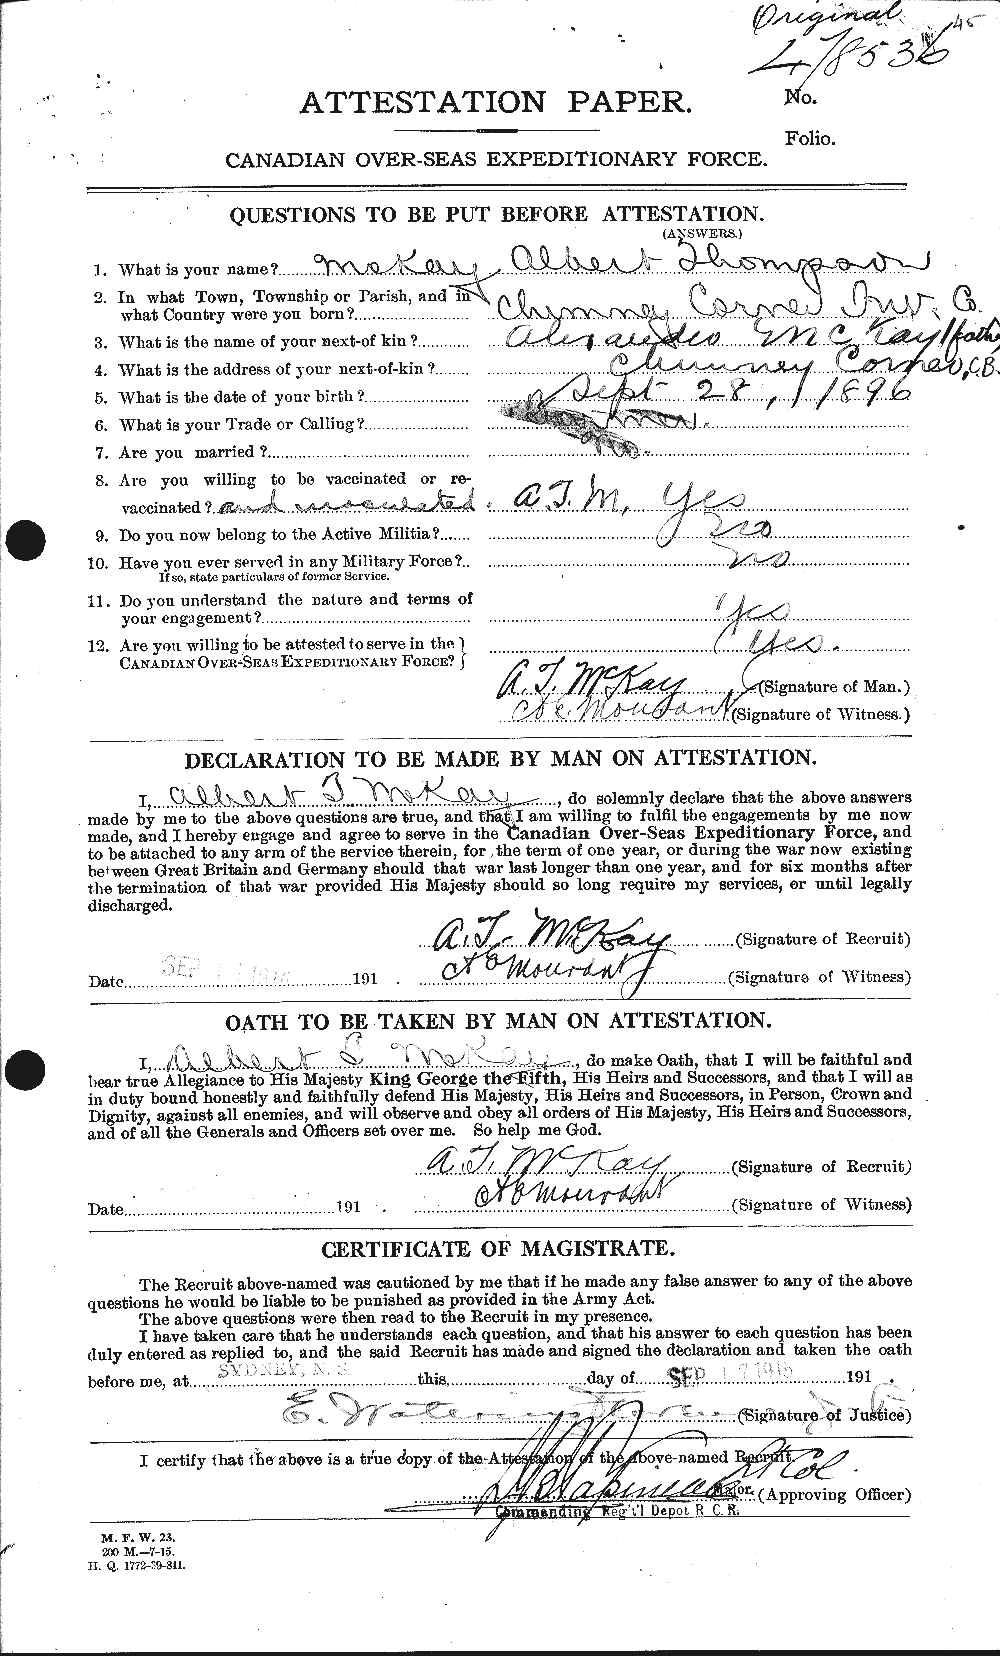 Personnel Records of the First World War - CEF 530888a